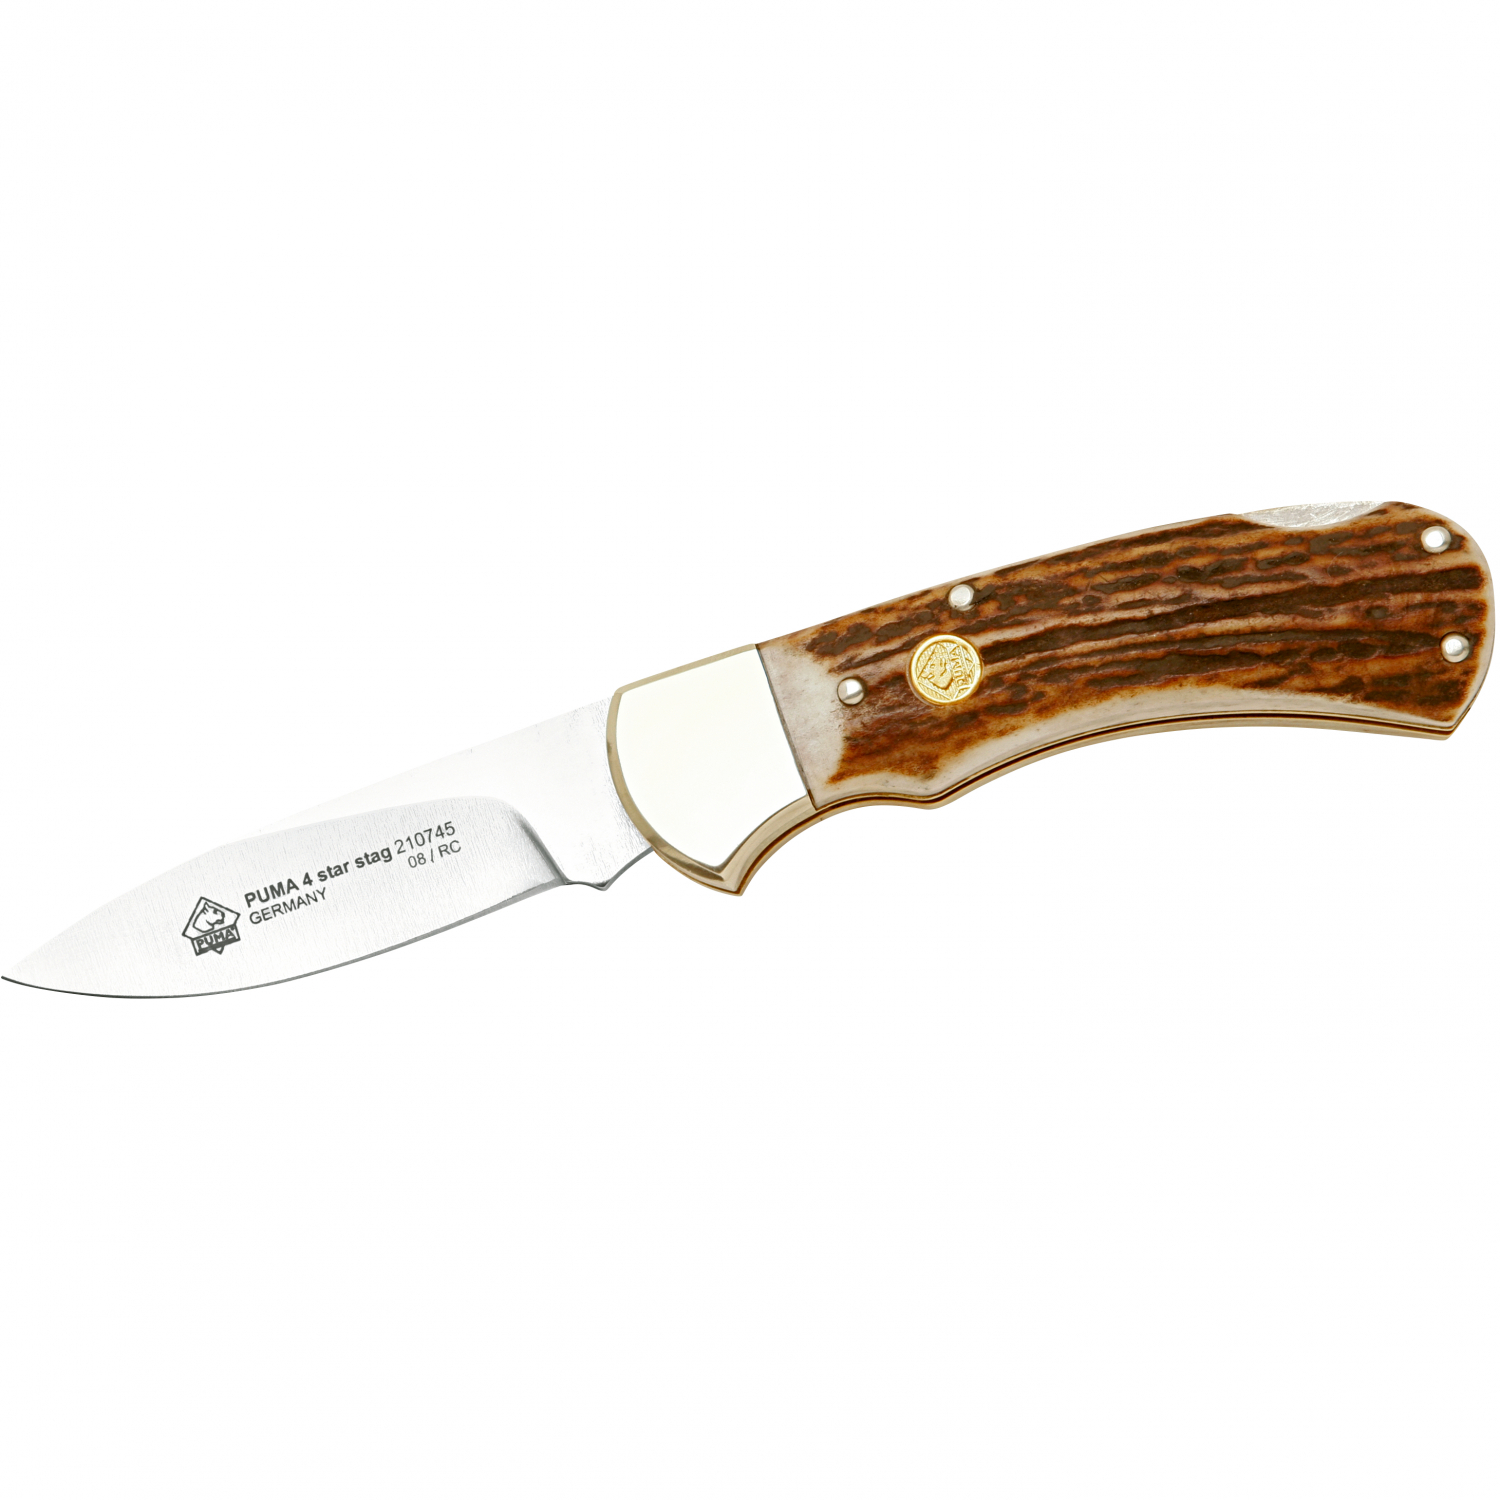 Puma Hunting knife III at low prices | Hunting